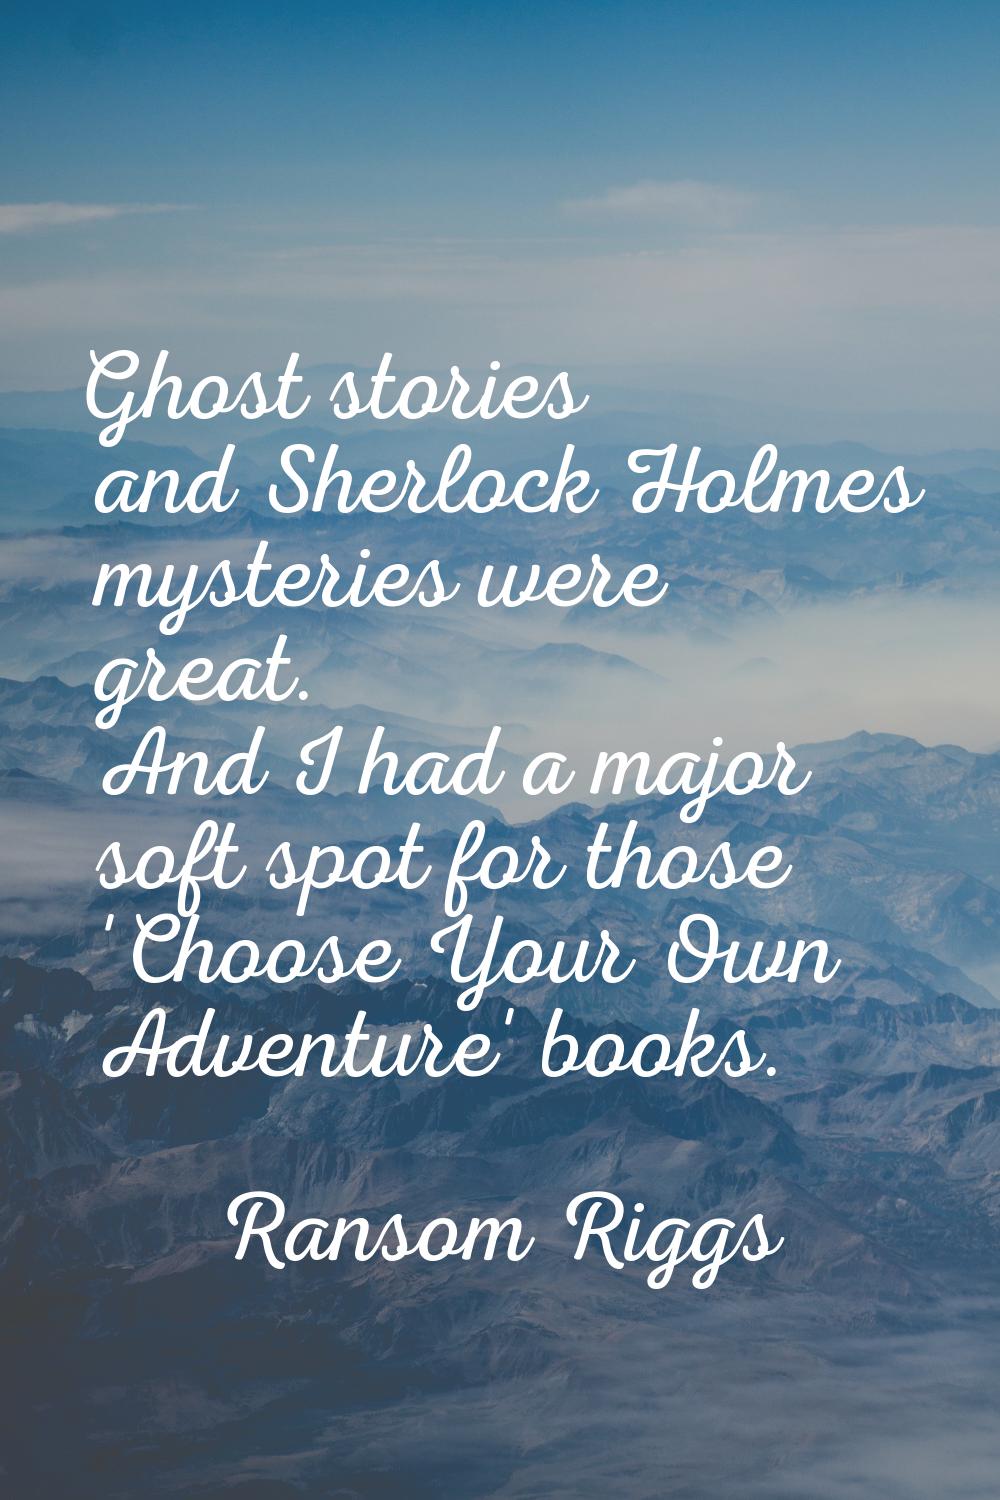 Ghost stories and Sherlock Holmes mysteries were great. And I had a major soft spot for those 'Choo